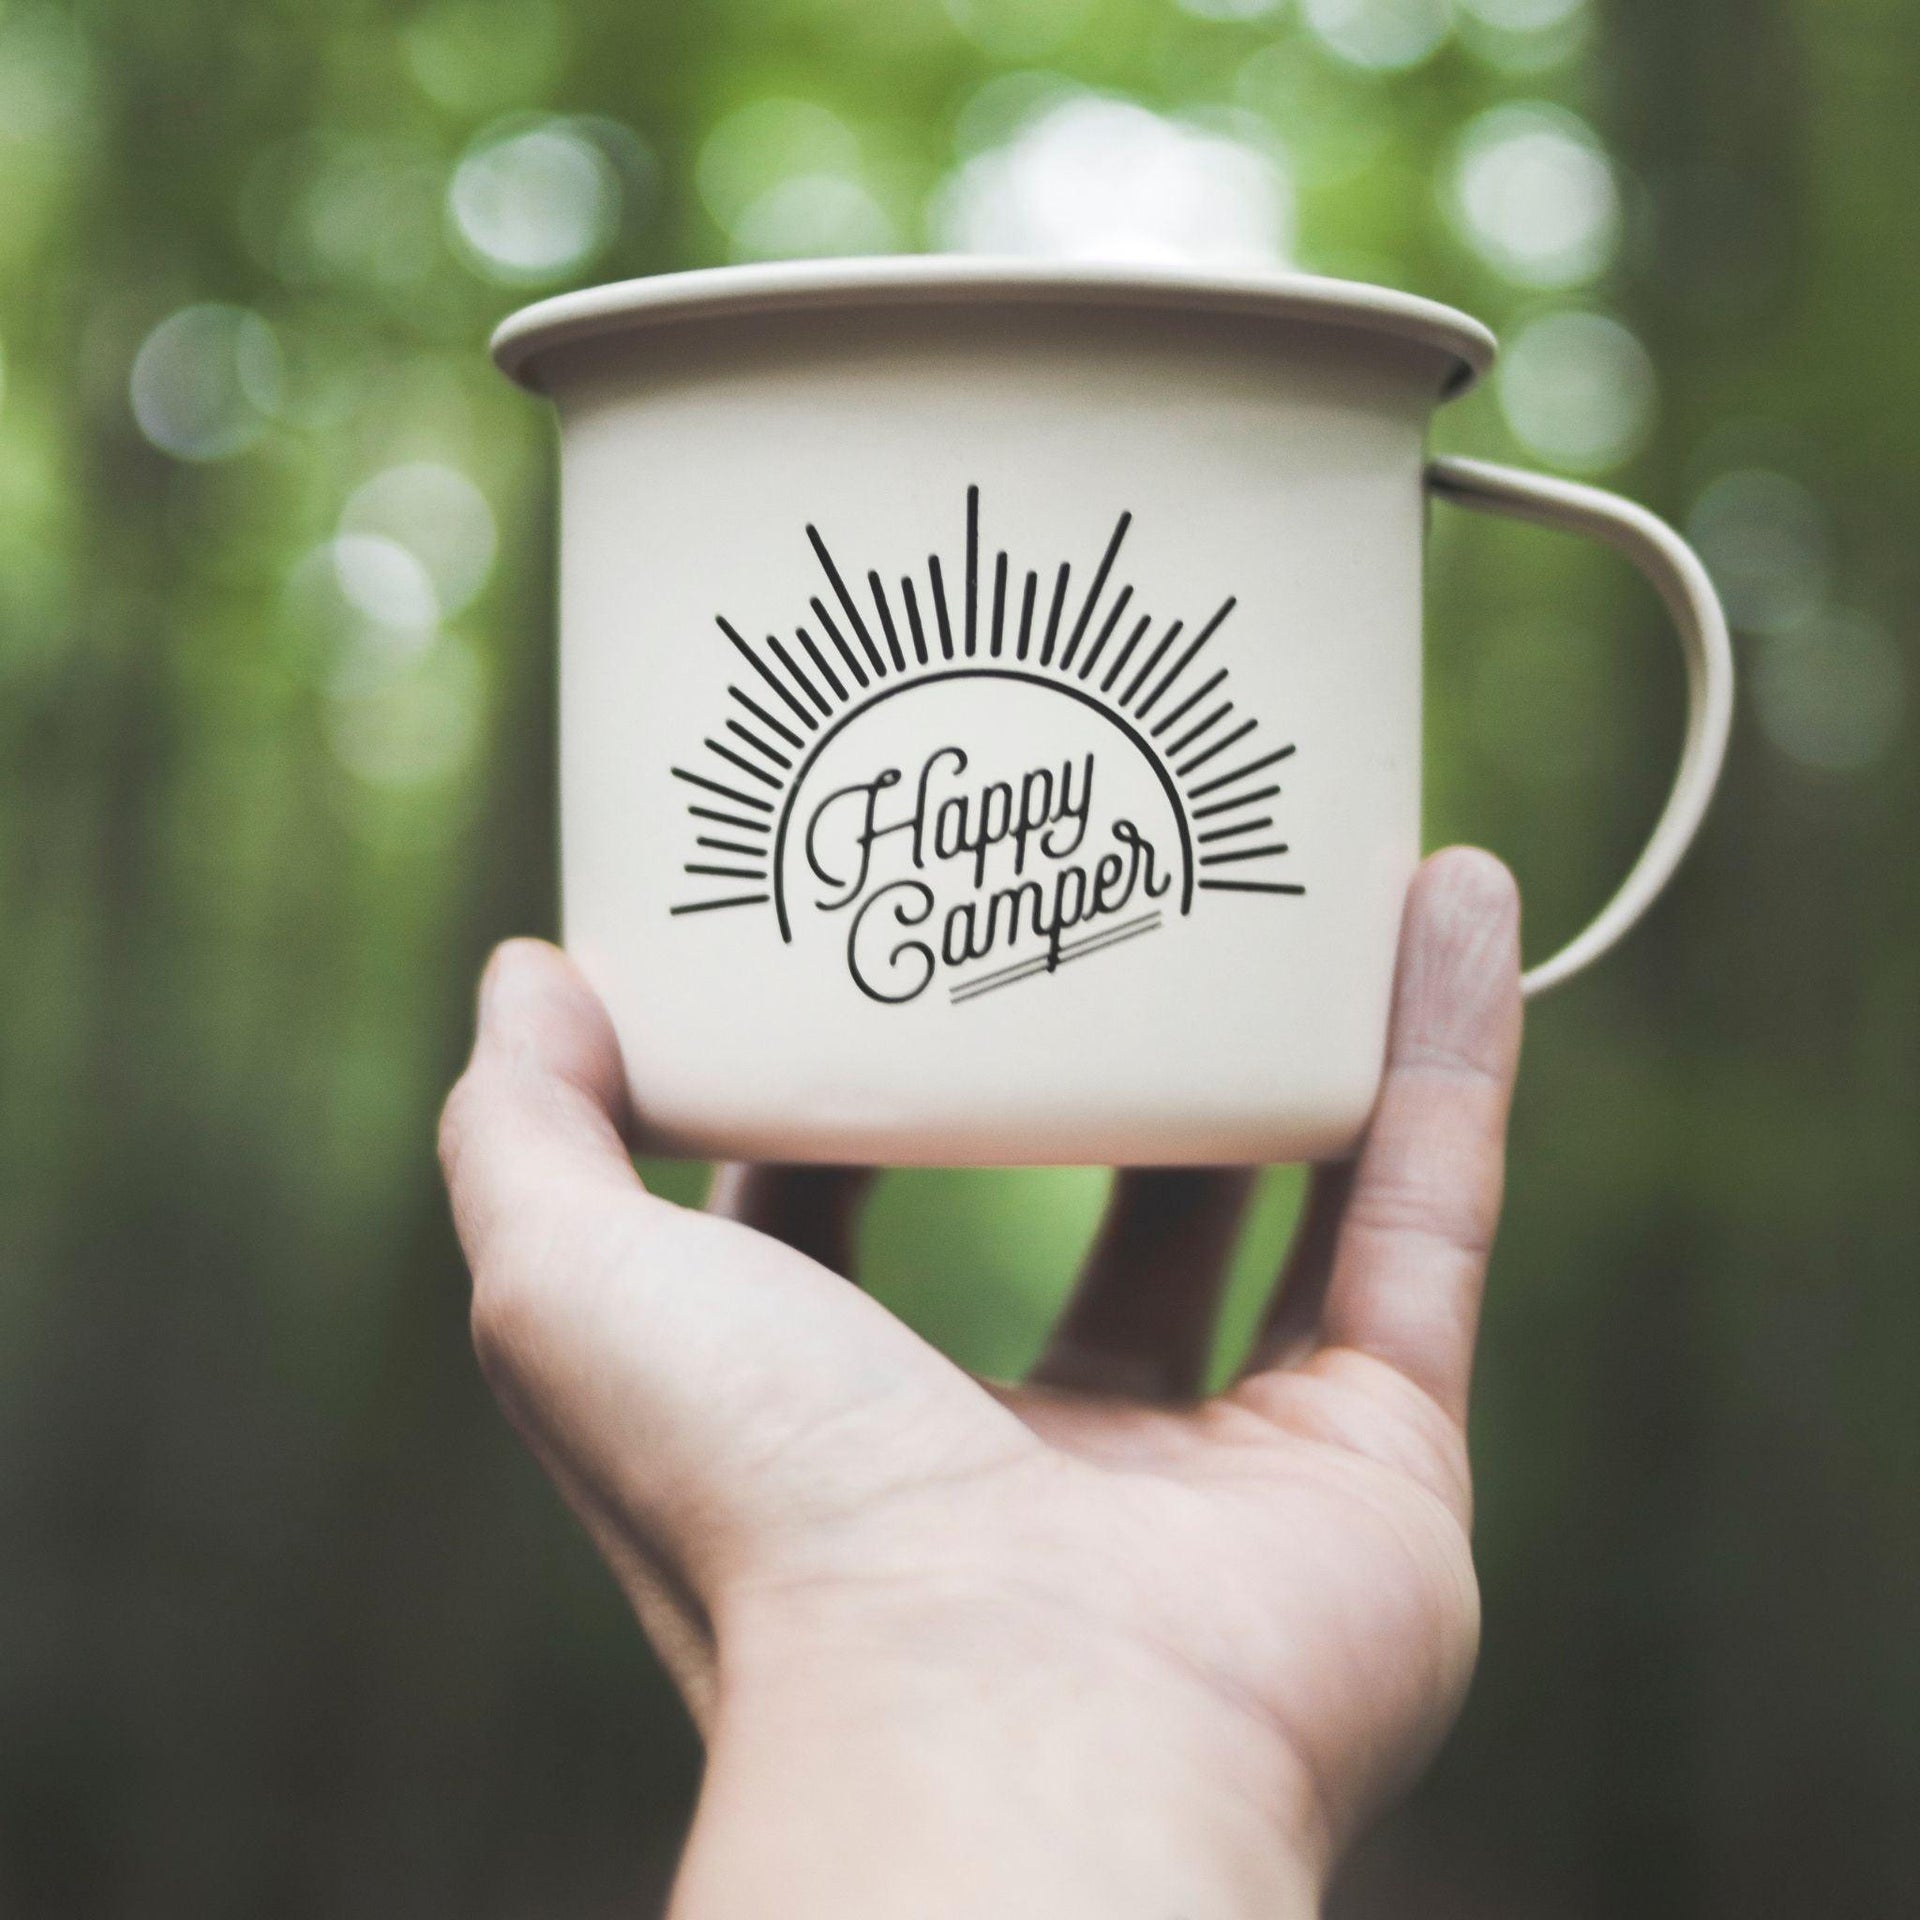 Cups & Mugs - About Camping